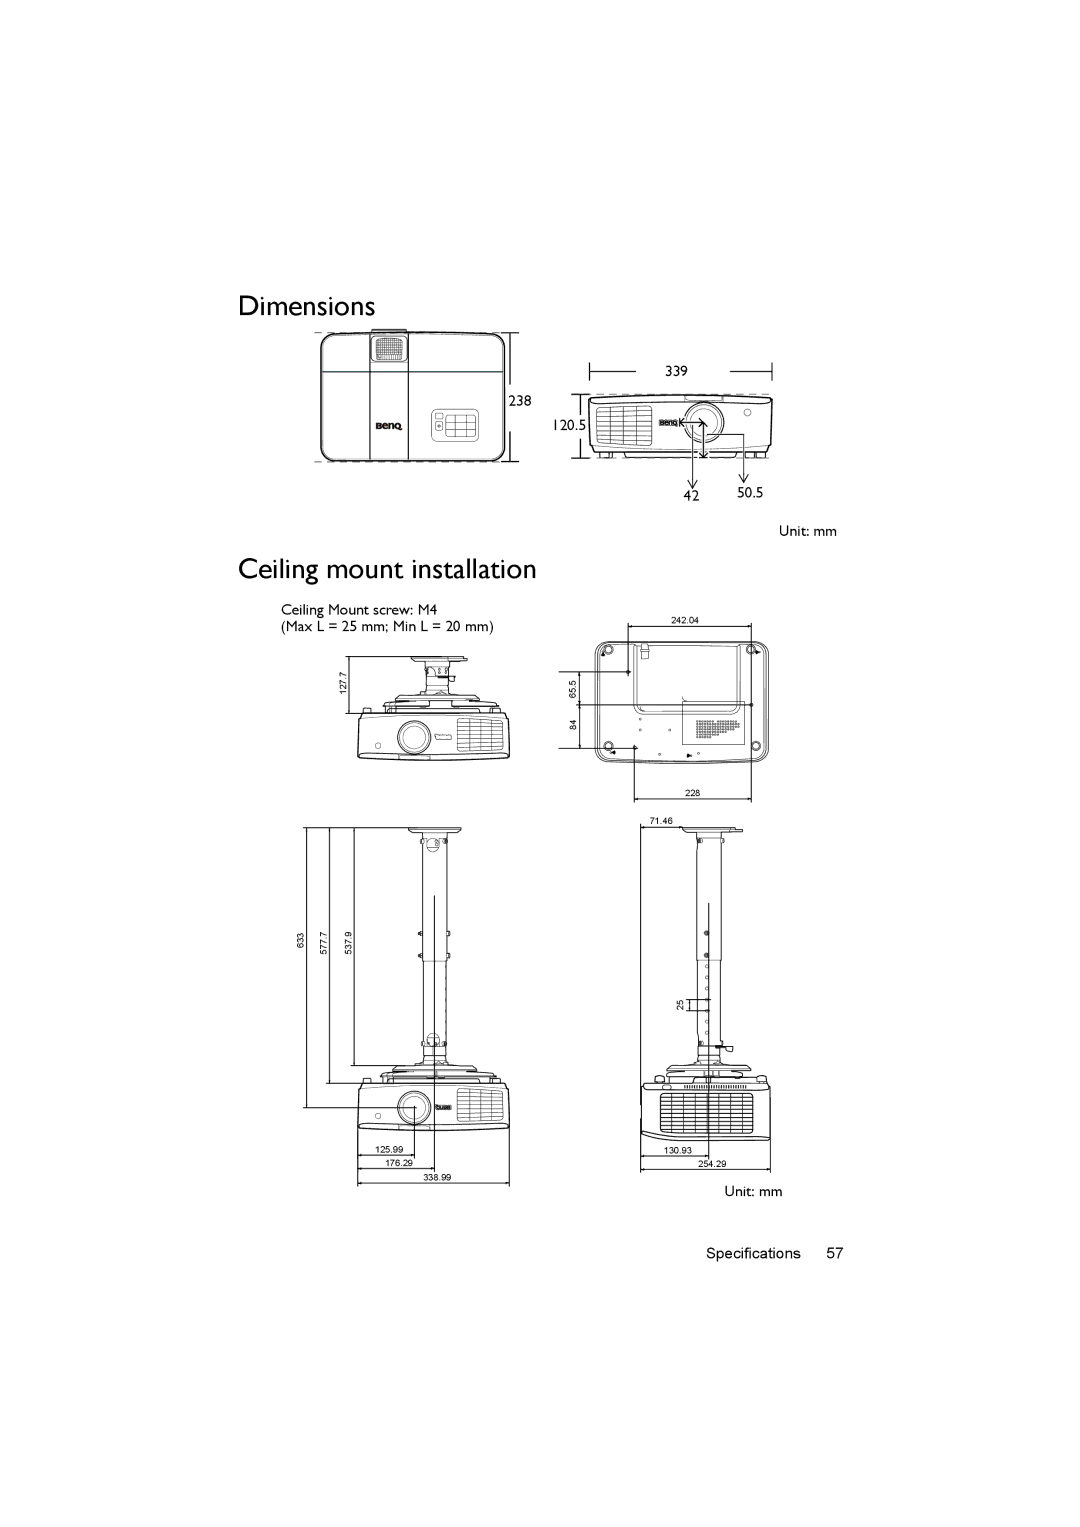 BenQ MX722 user manual Dimensions, Ceiling mount installation 